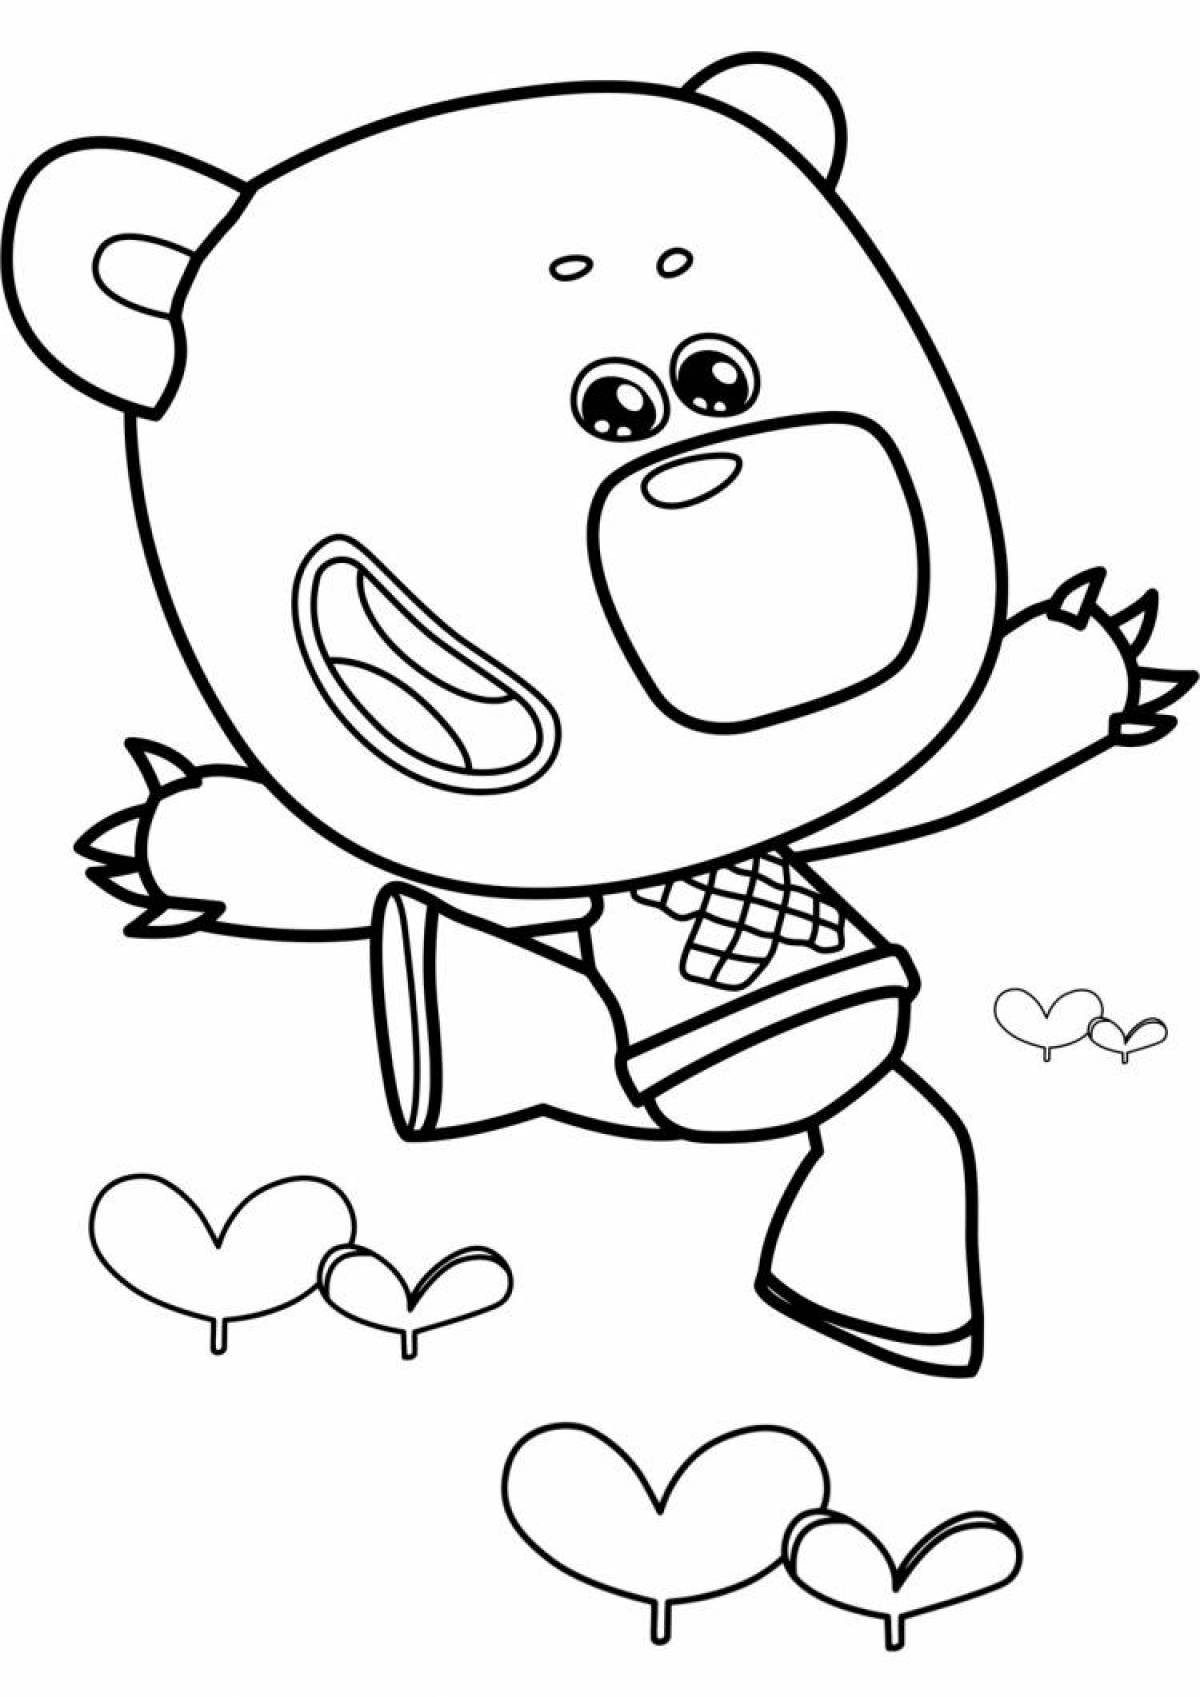 Charming coloring page turn on facial expressions